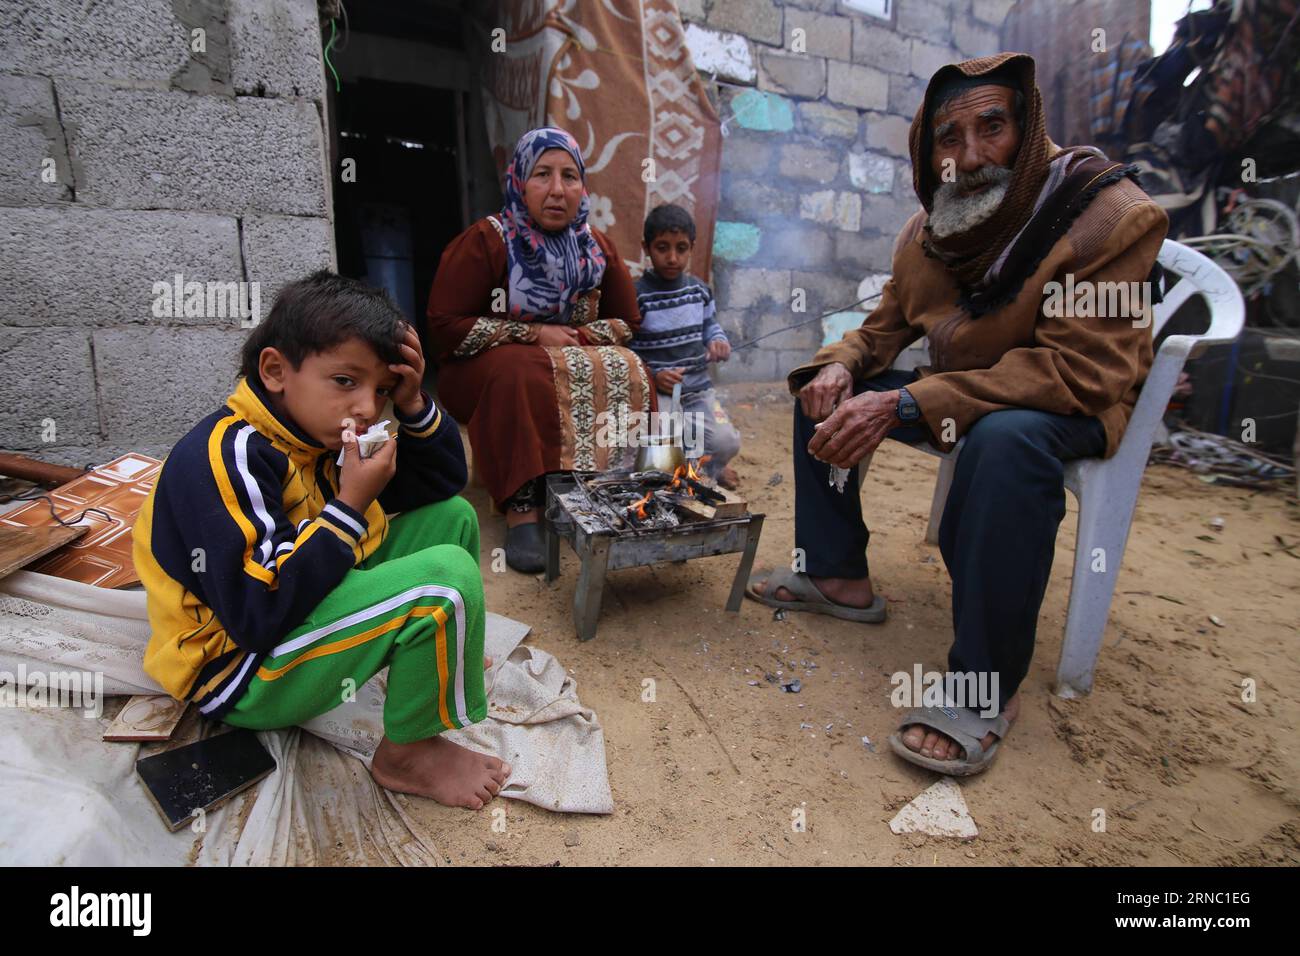 (160317) -- GAZA, March 17, 2016 -- Palestinian Jihan Moussa Abu Mohsen, 48, sits with her family members near the fire inside their house in the southern Gaza Strip city of Khan Yunis, on March 17, 2016. Jihan, who works from the morning hours till late the day, sells a cart of bricks to stone manufacturers for 4 US dollars per day. Her work is the main source of income for her family which consists of her husband and four children. Jihan and her son Ahmad get up early every morning to collect bricks and stones from anywhere they find them, whether in landfills, streets or roadsides. Khaled O Stock Photo